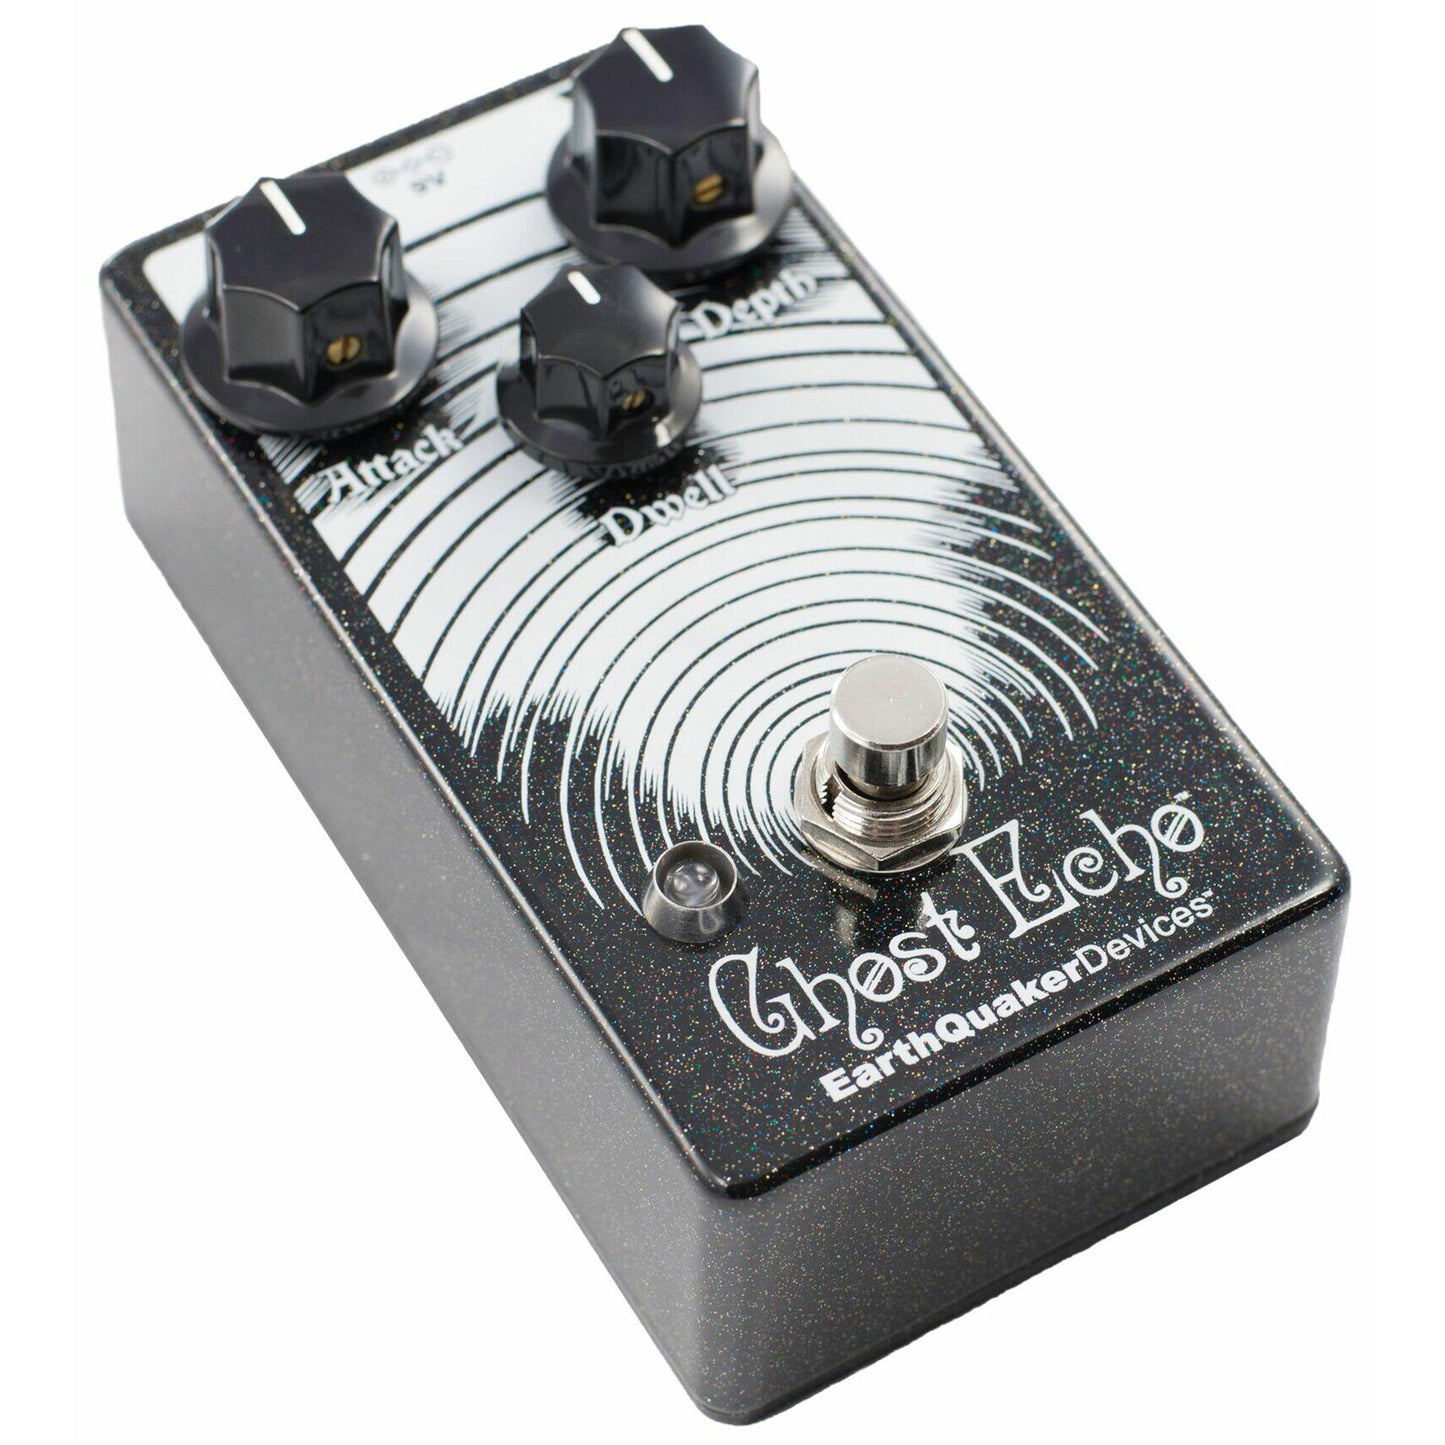 EarthQuaker Devices Ghost Echo V3 Reverb Pedal